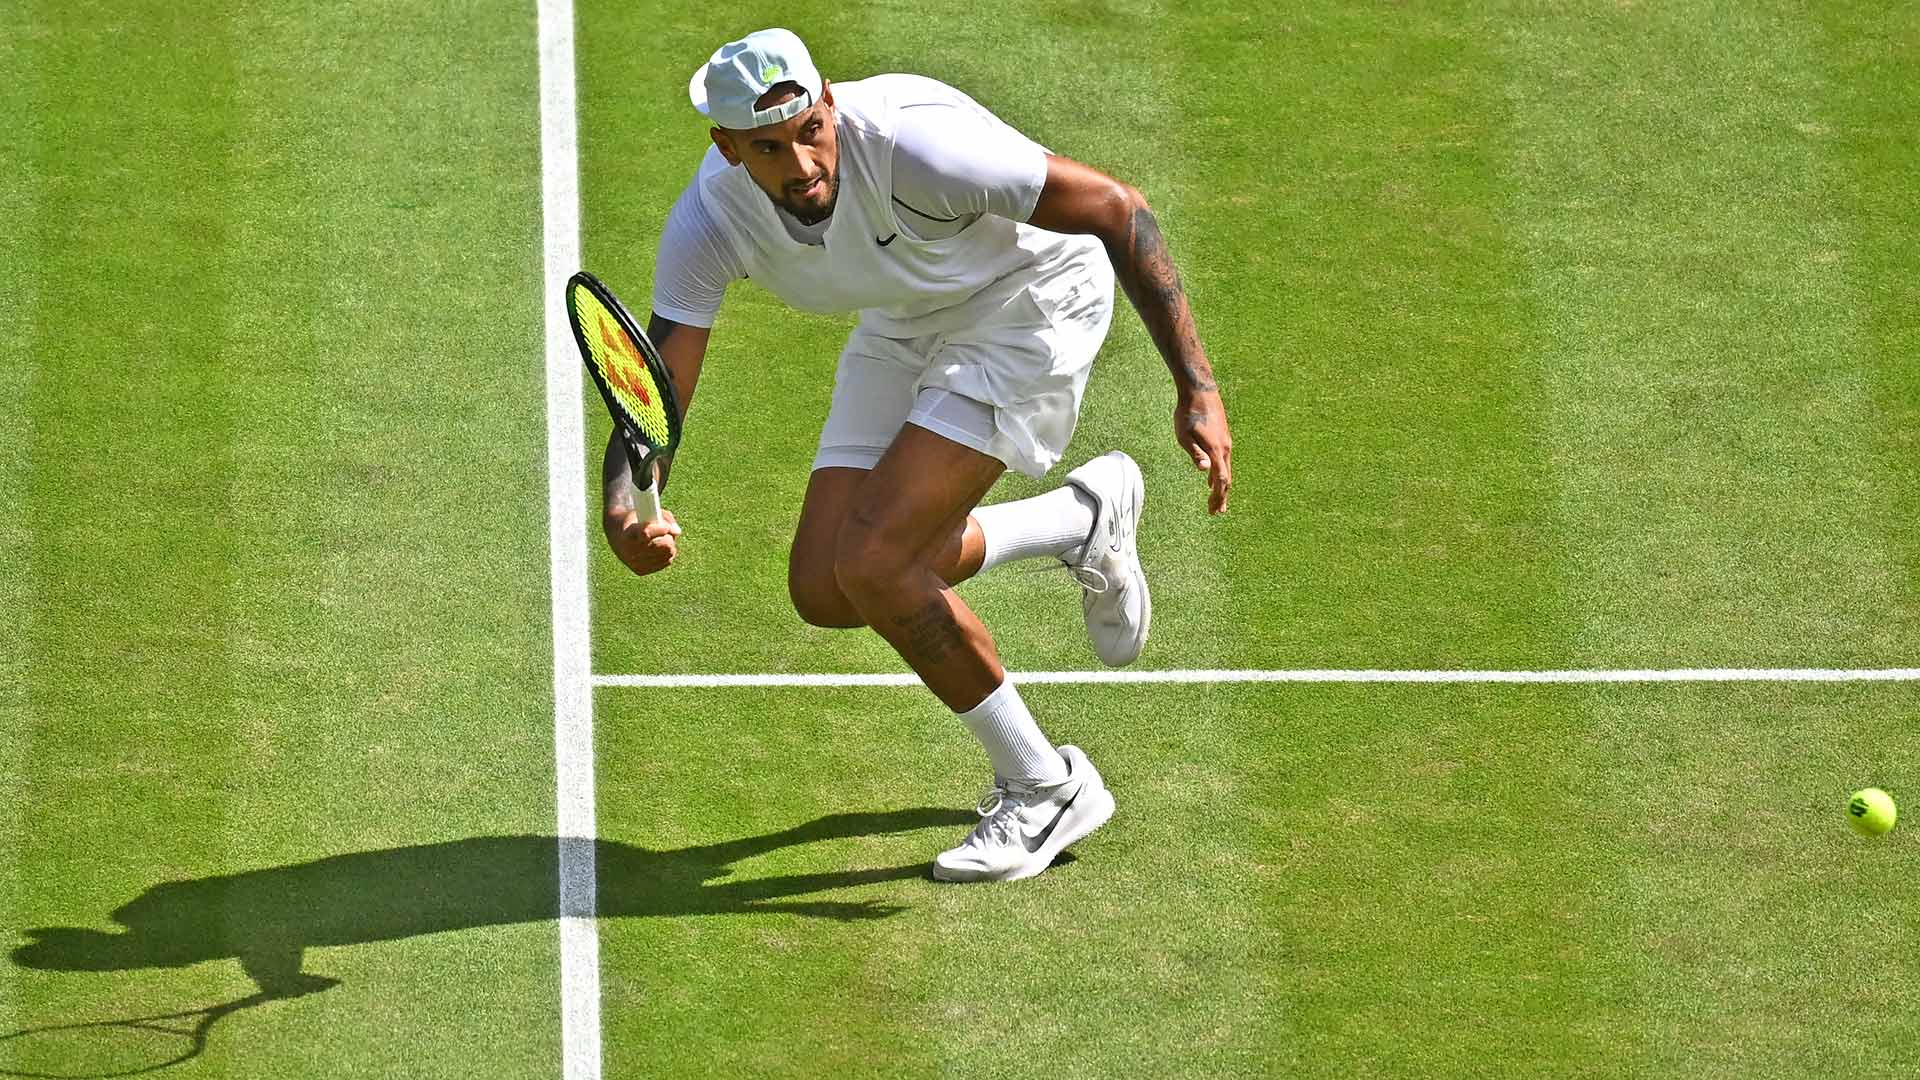 Nick Kyrgios holds a 36-19 record in tour-level matches on grass.